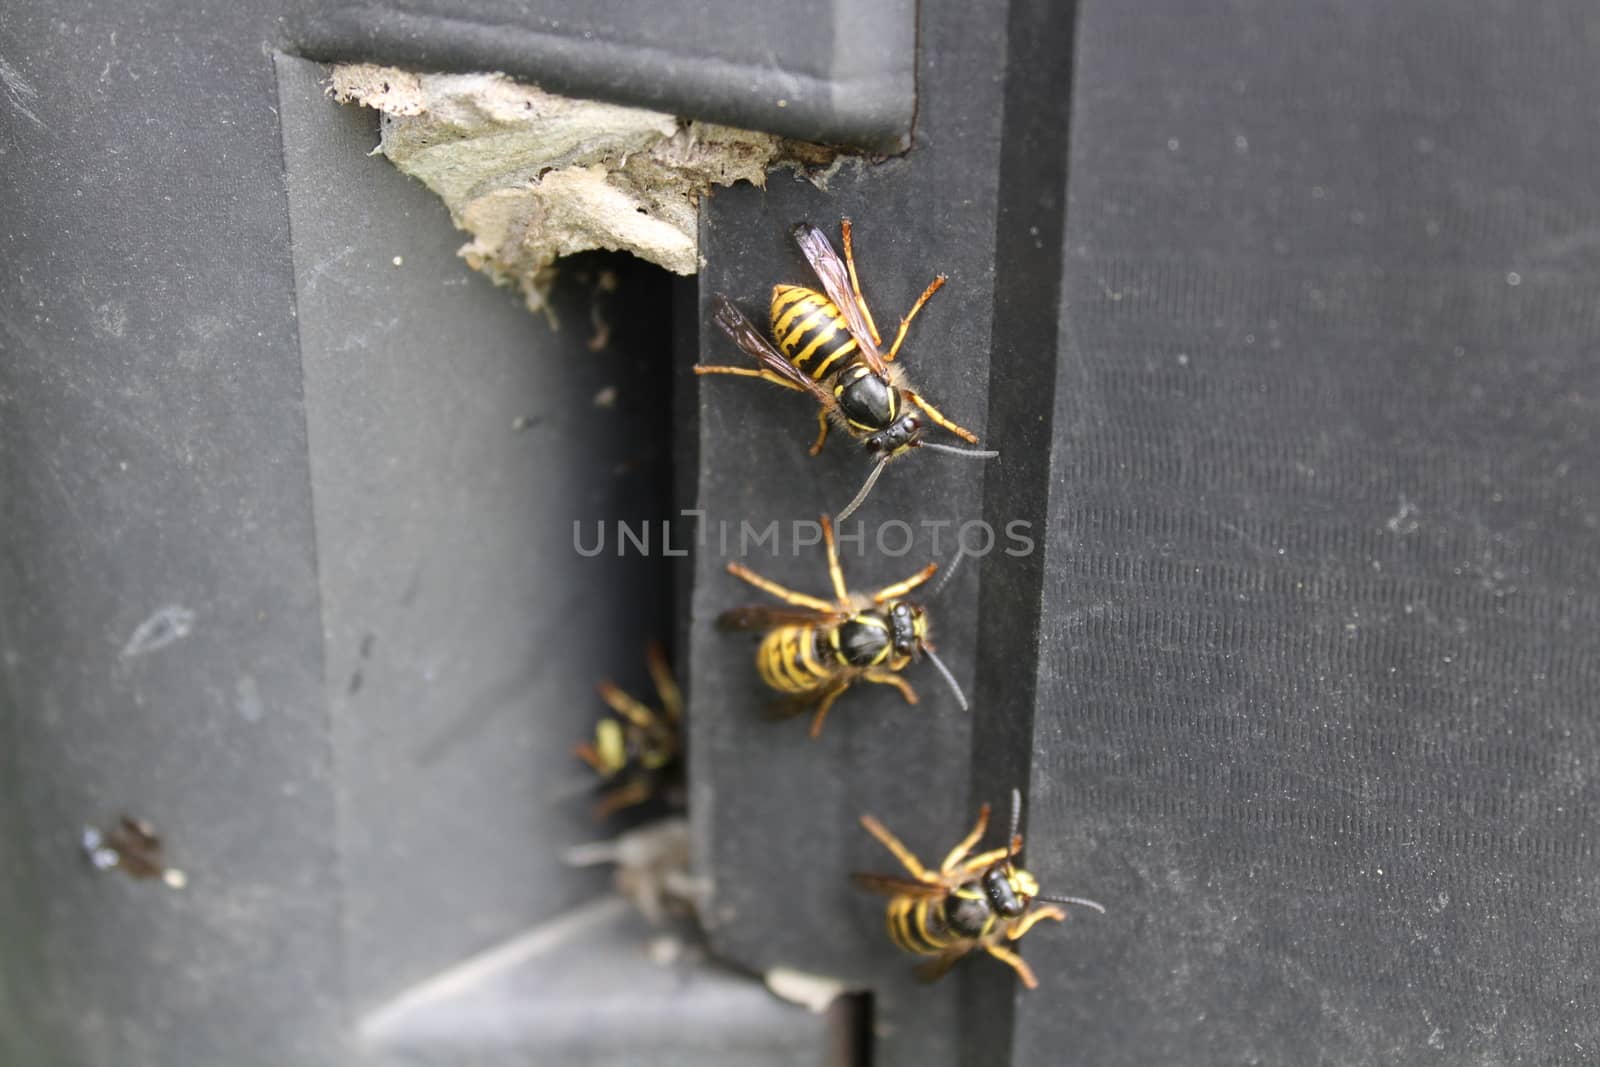 wasps on the composter by martina_unbehauen